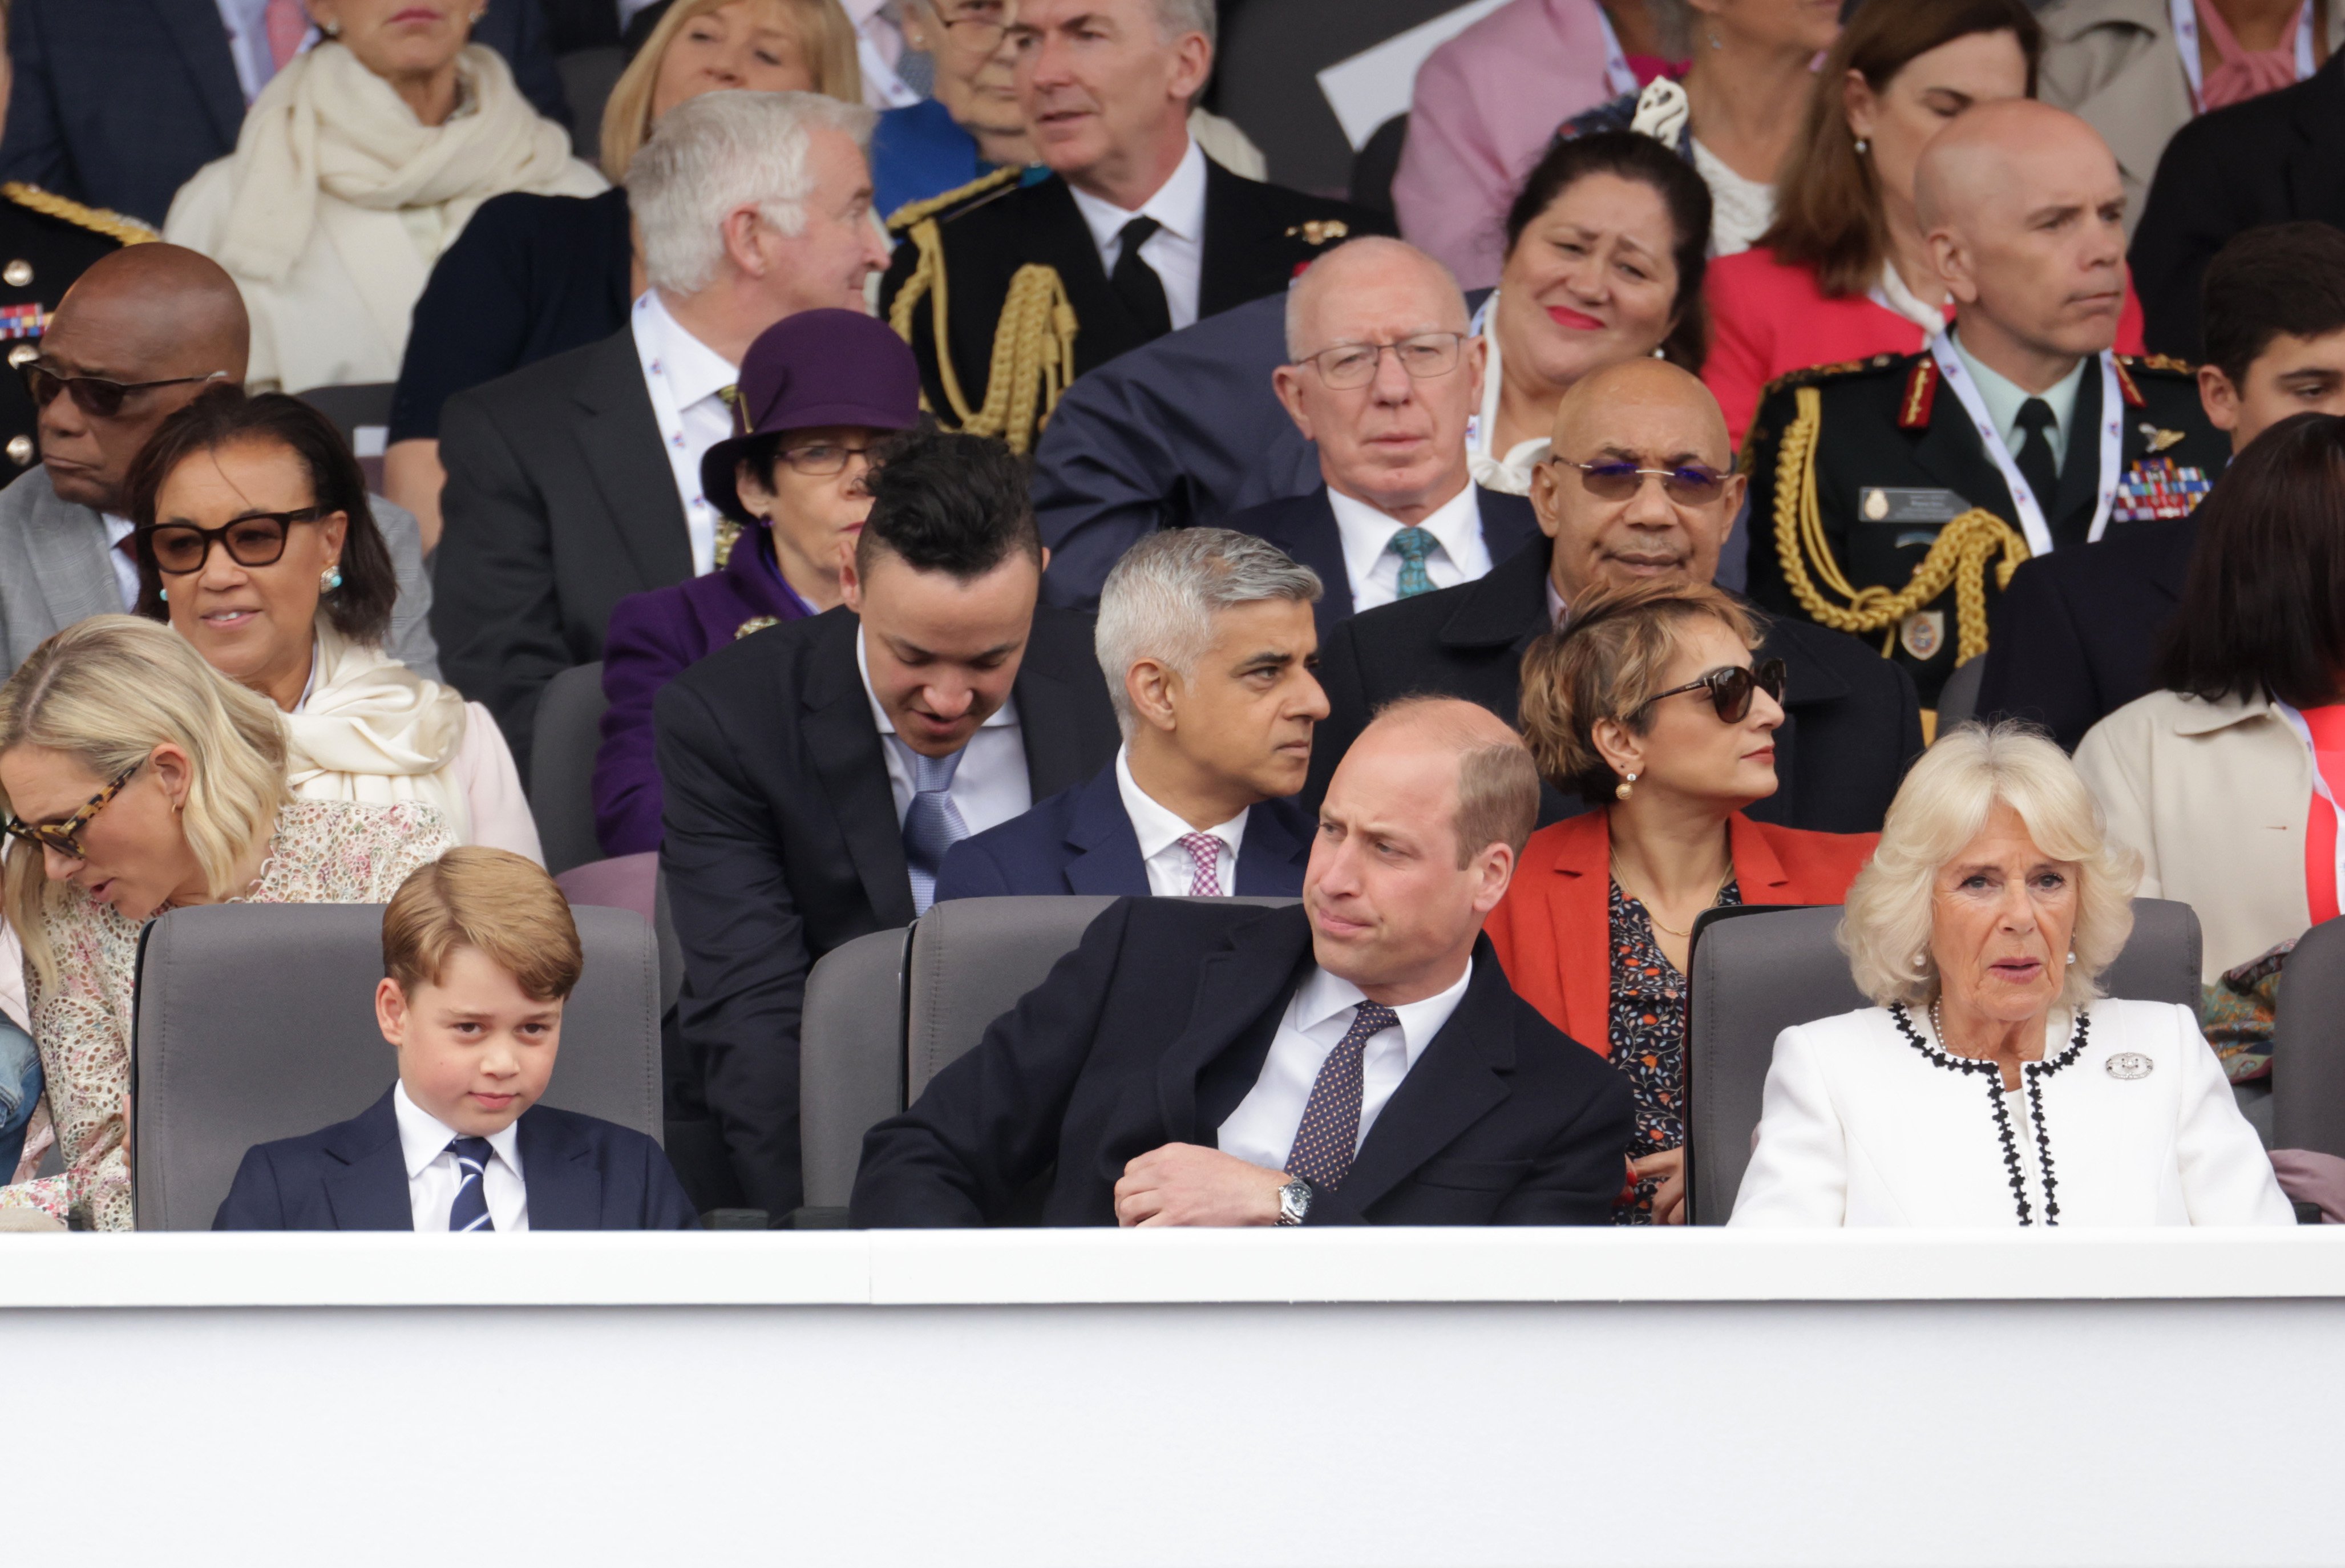 Prince William , Prince George and Queen Consort Camilla in London 2022. | Source: Getty Images